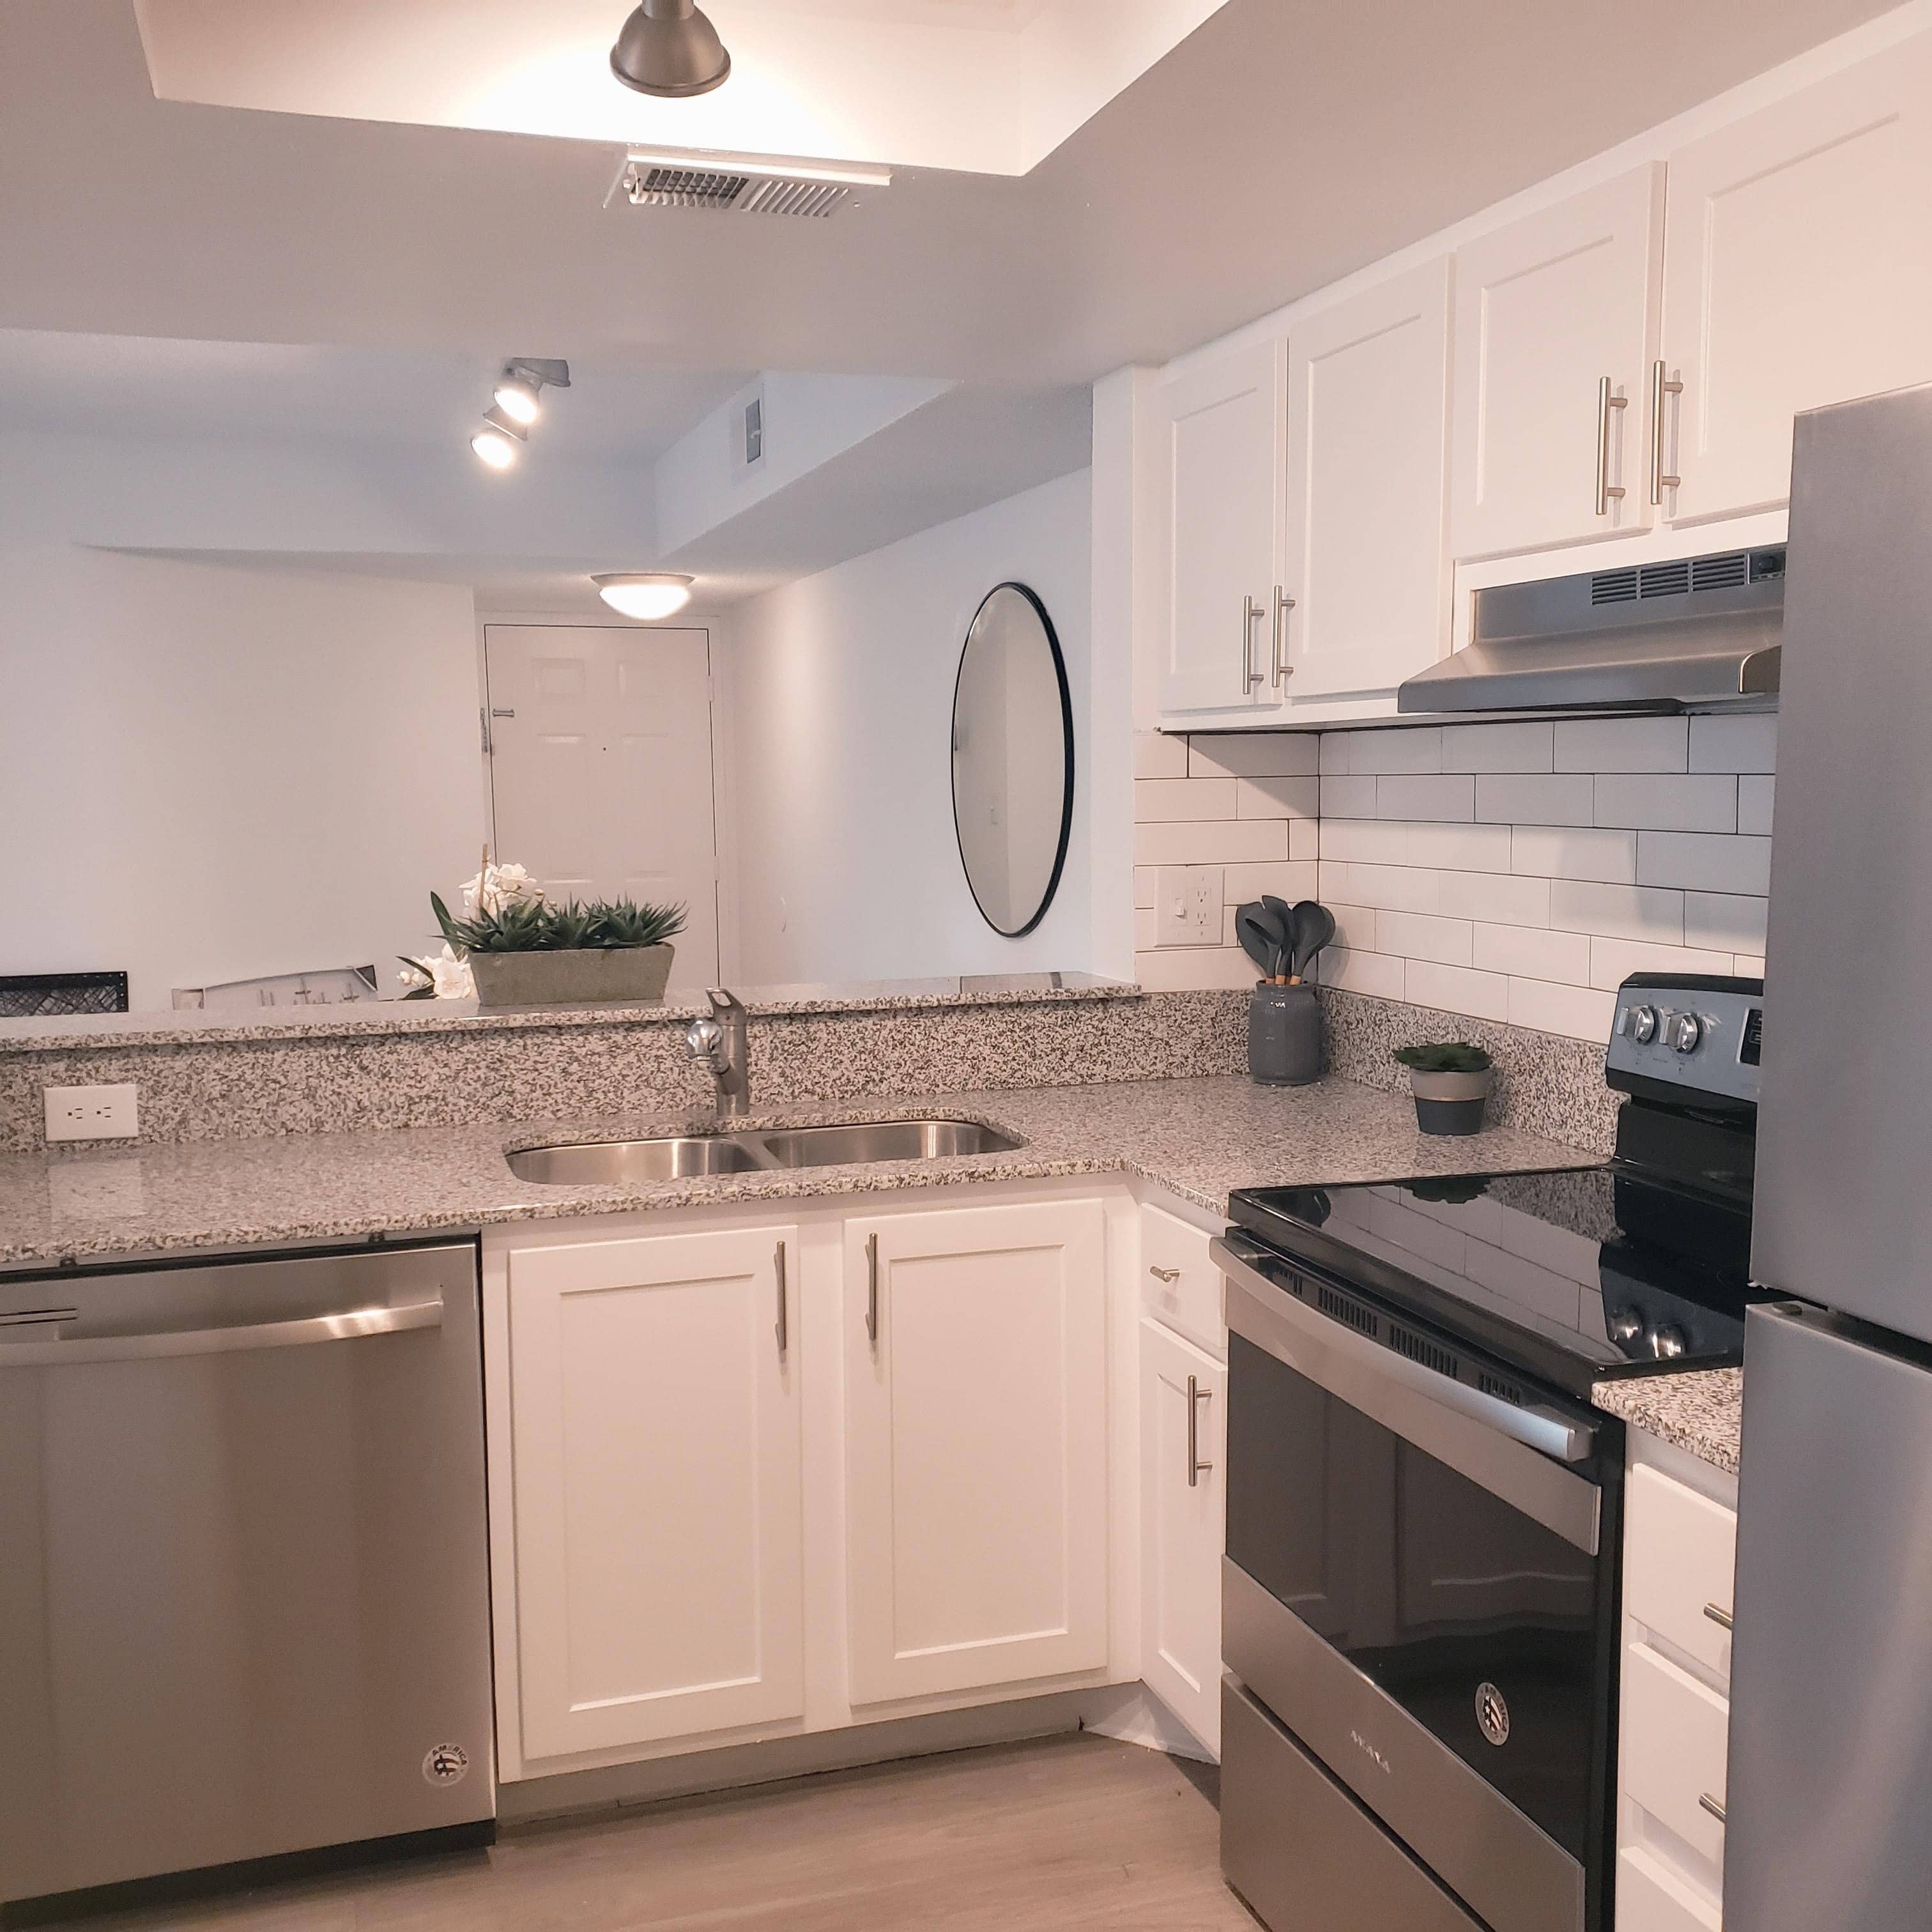 Cascades Model kitchen with white cabinets, stainless steel appliances, white tile backsplash and round mirror.